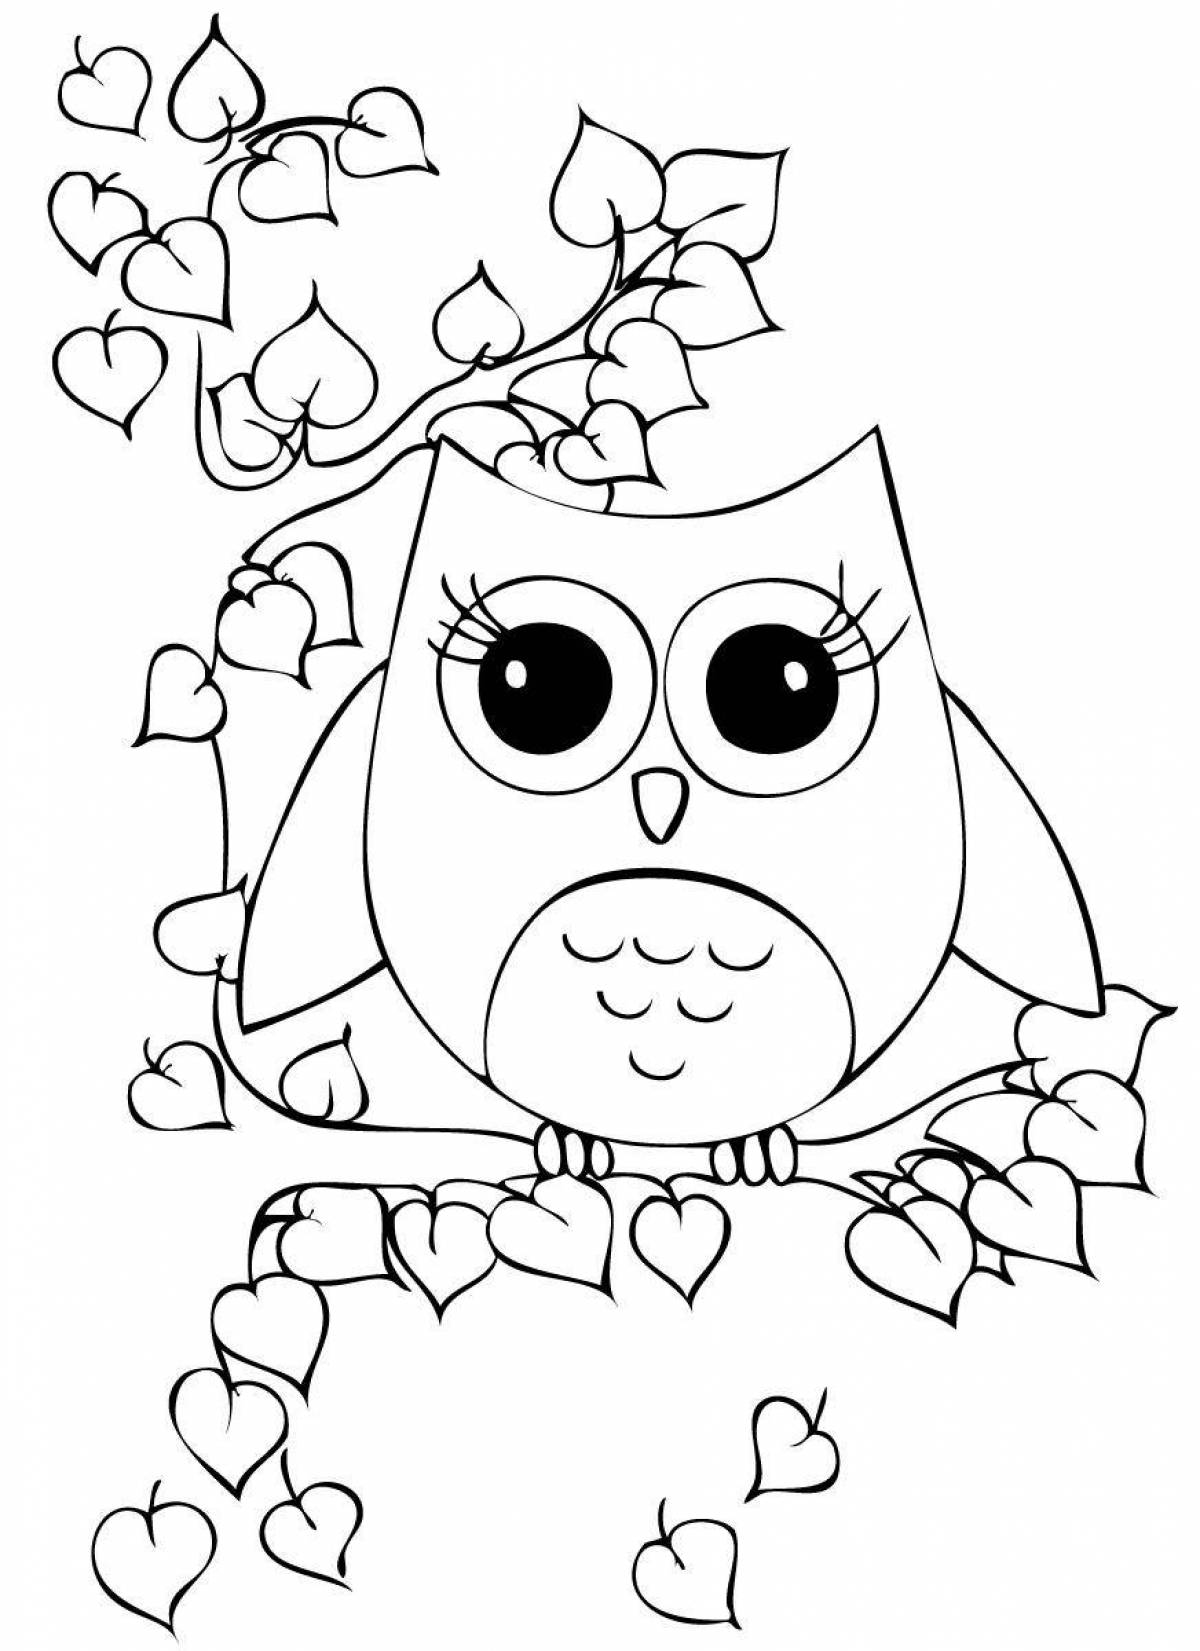 Fairy owlet coloring page for kids